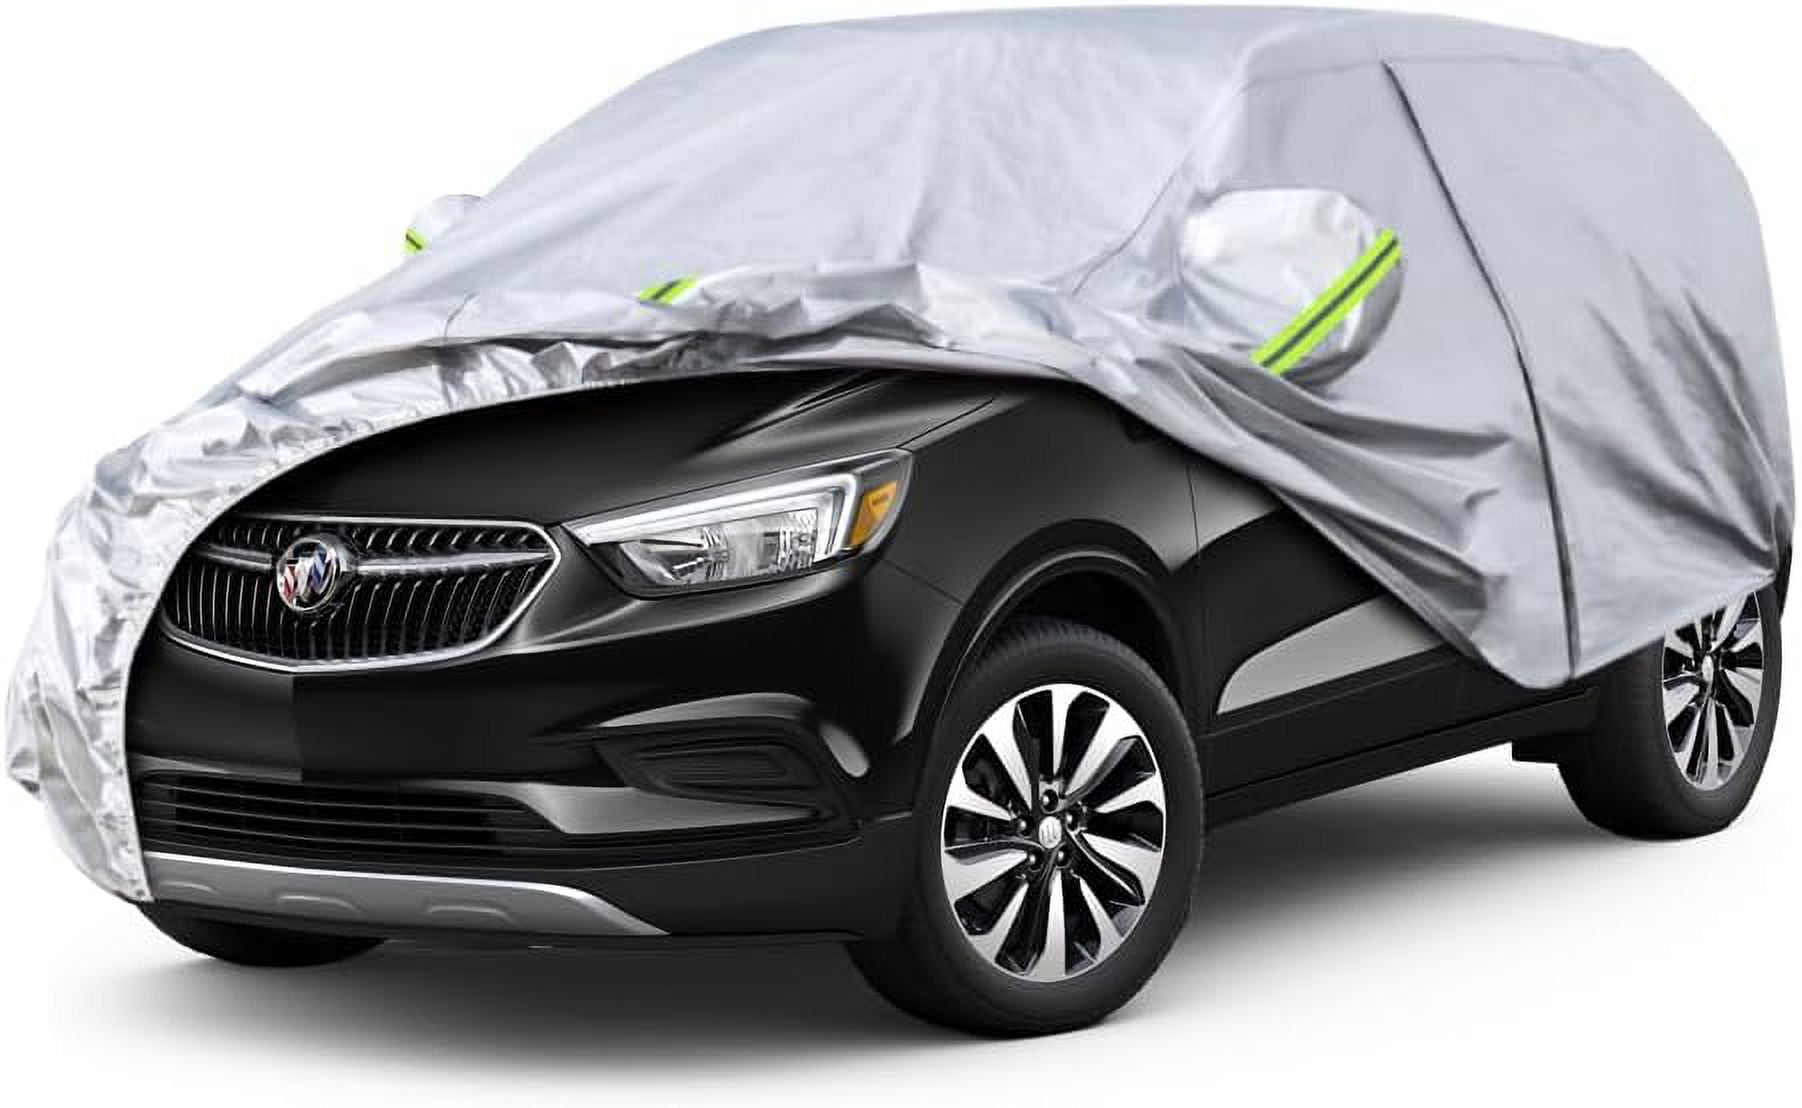 Kaugung SUV Car Cover Custom Fit Ford Escape from 2000 to 2023, Waterproof  All Weather for Automobiles, Sun Rain Dust Snow Protection. (Ships from US  Warehouse, Arrive Within 3-7 Days) 